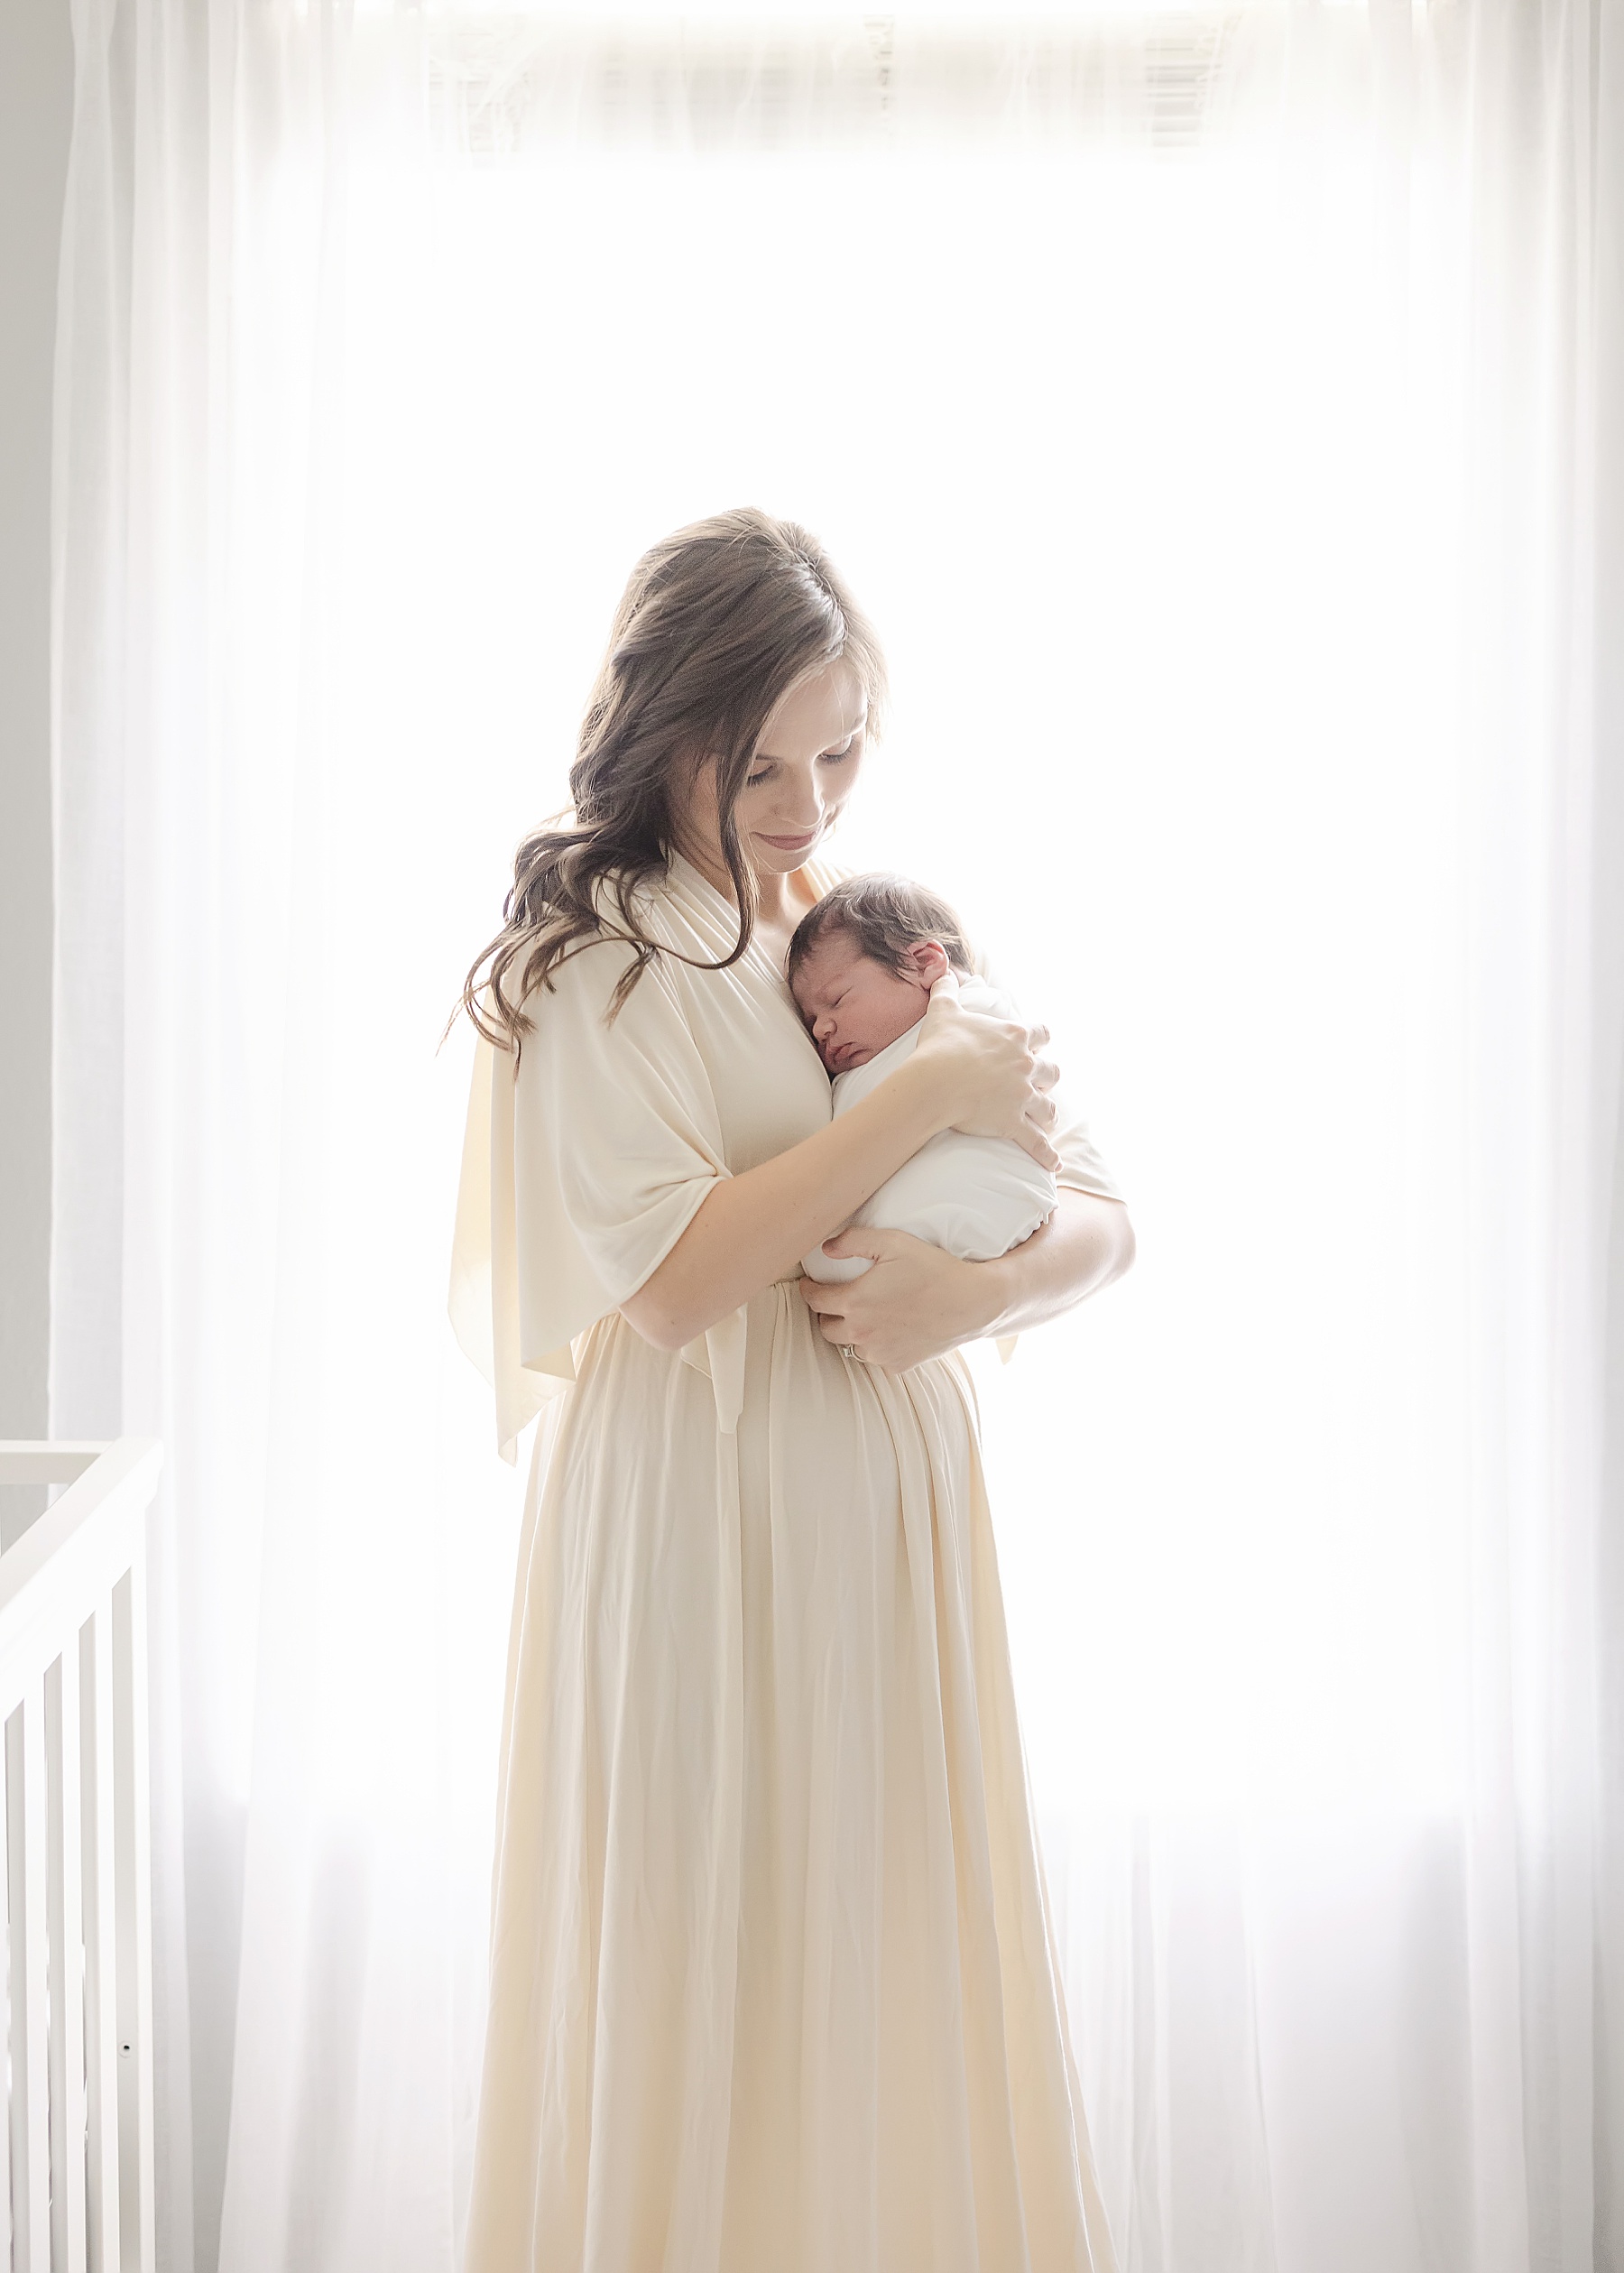 woman wearing long cream dress during in home newborn session holding newborn baby boy by window with white sheers